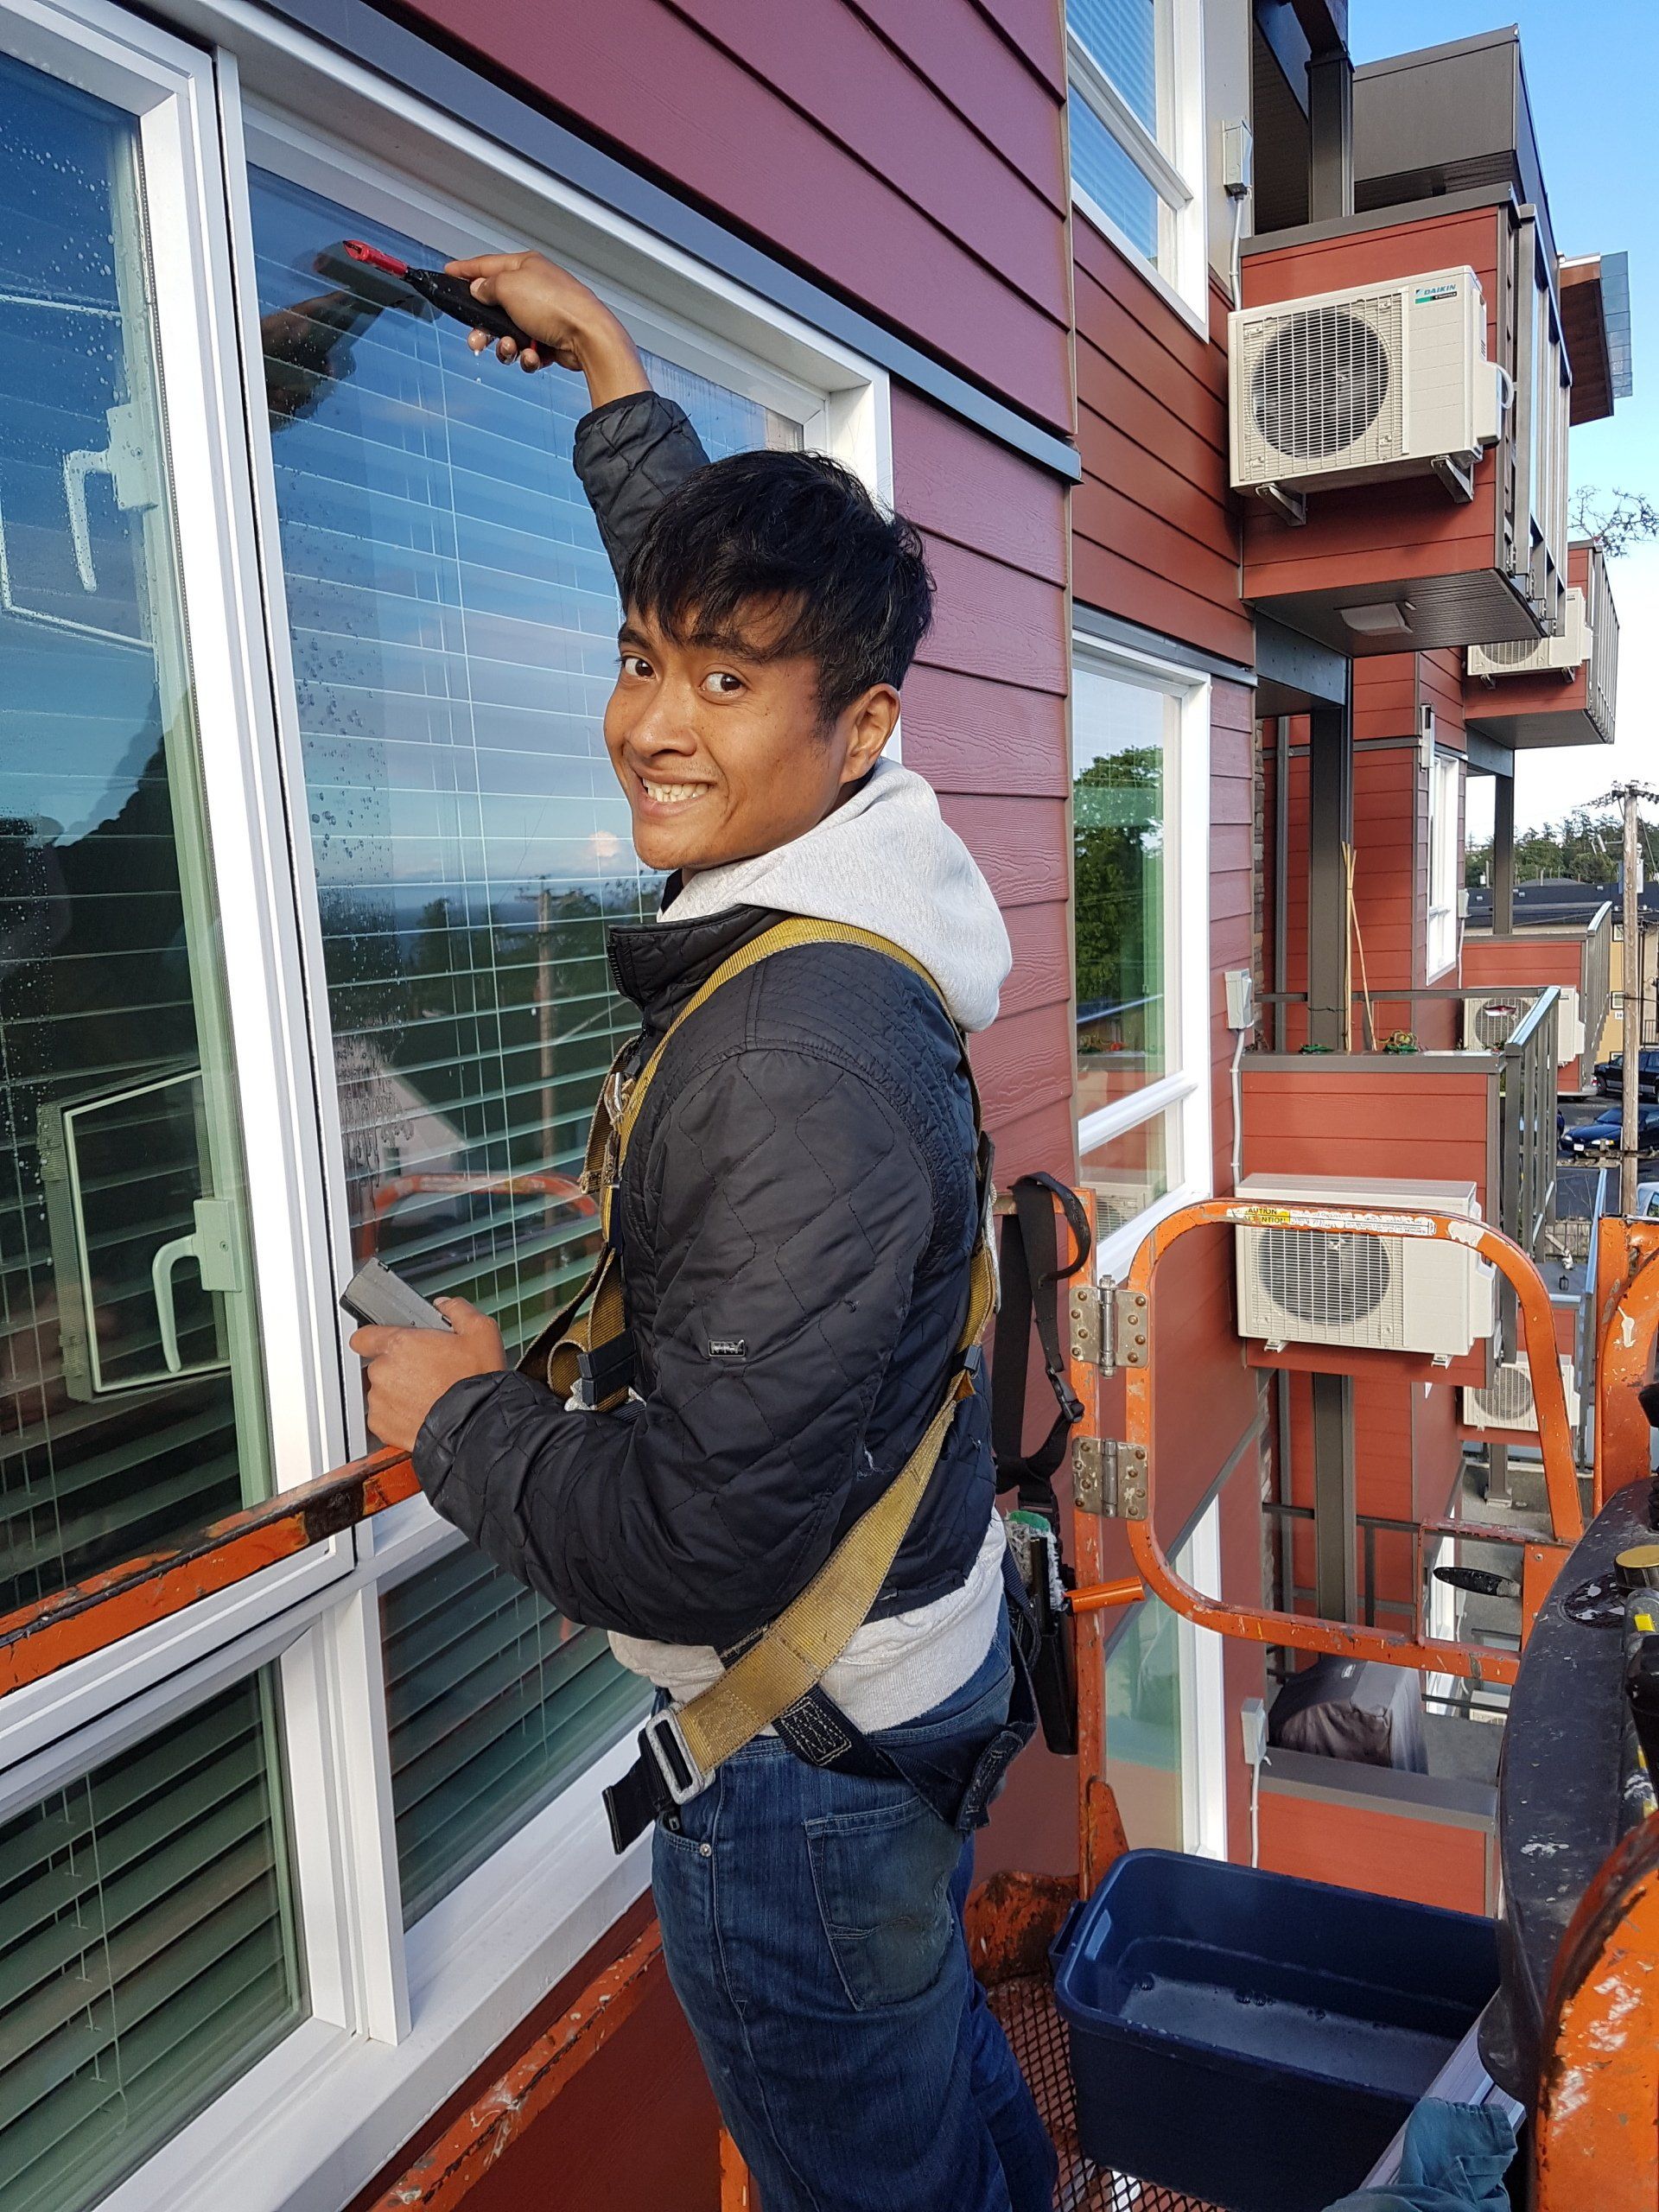 window cleaning victoria bc